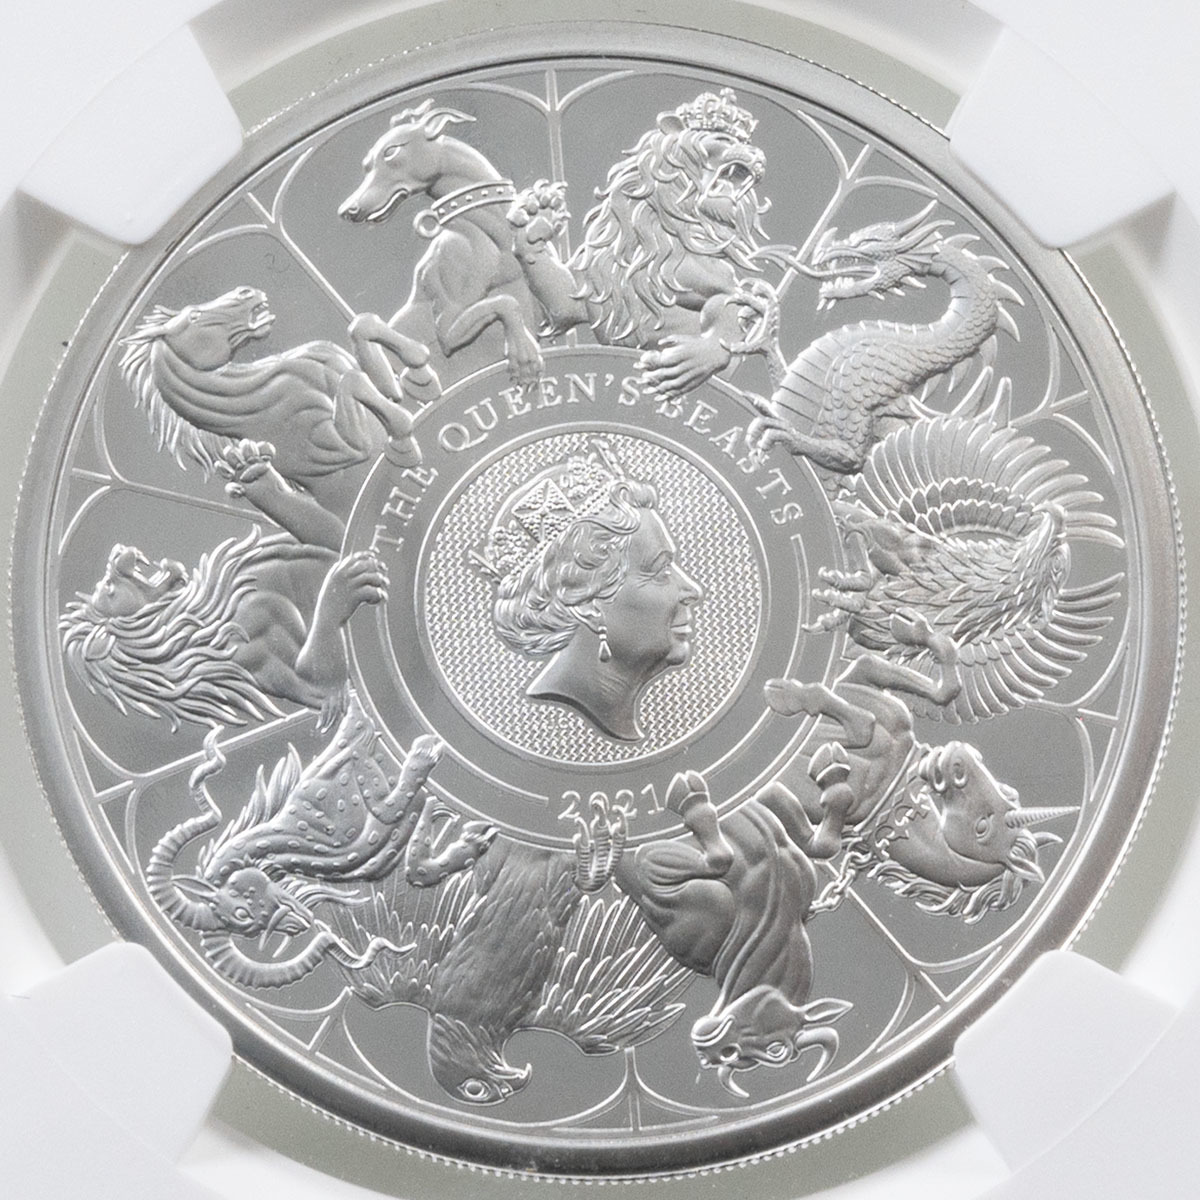 UK21QBSP 2021 Queen's Beasts Completer One Ounce Silver Proof Coin NGC Graded PF 70 Ultra Cameo First Releases Reverse